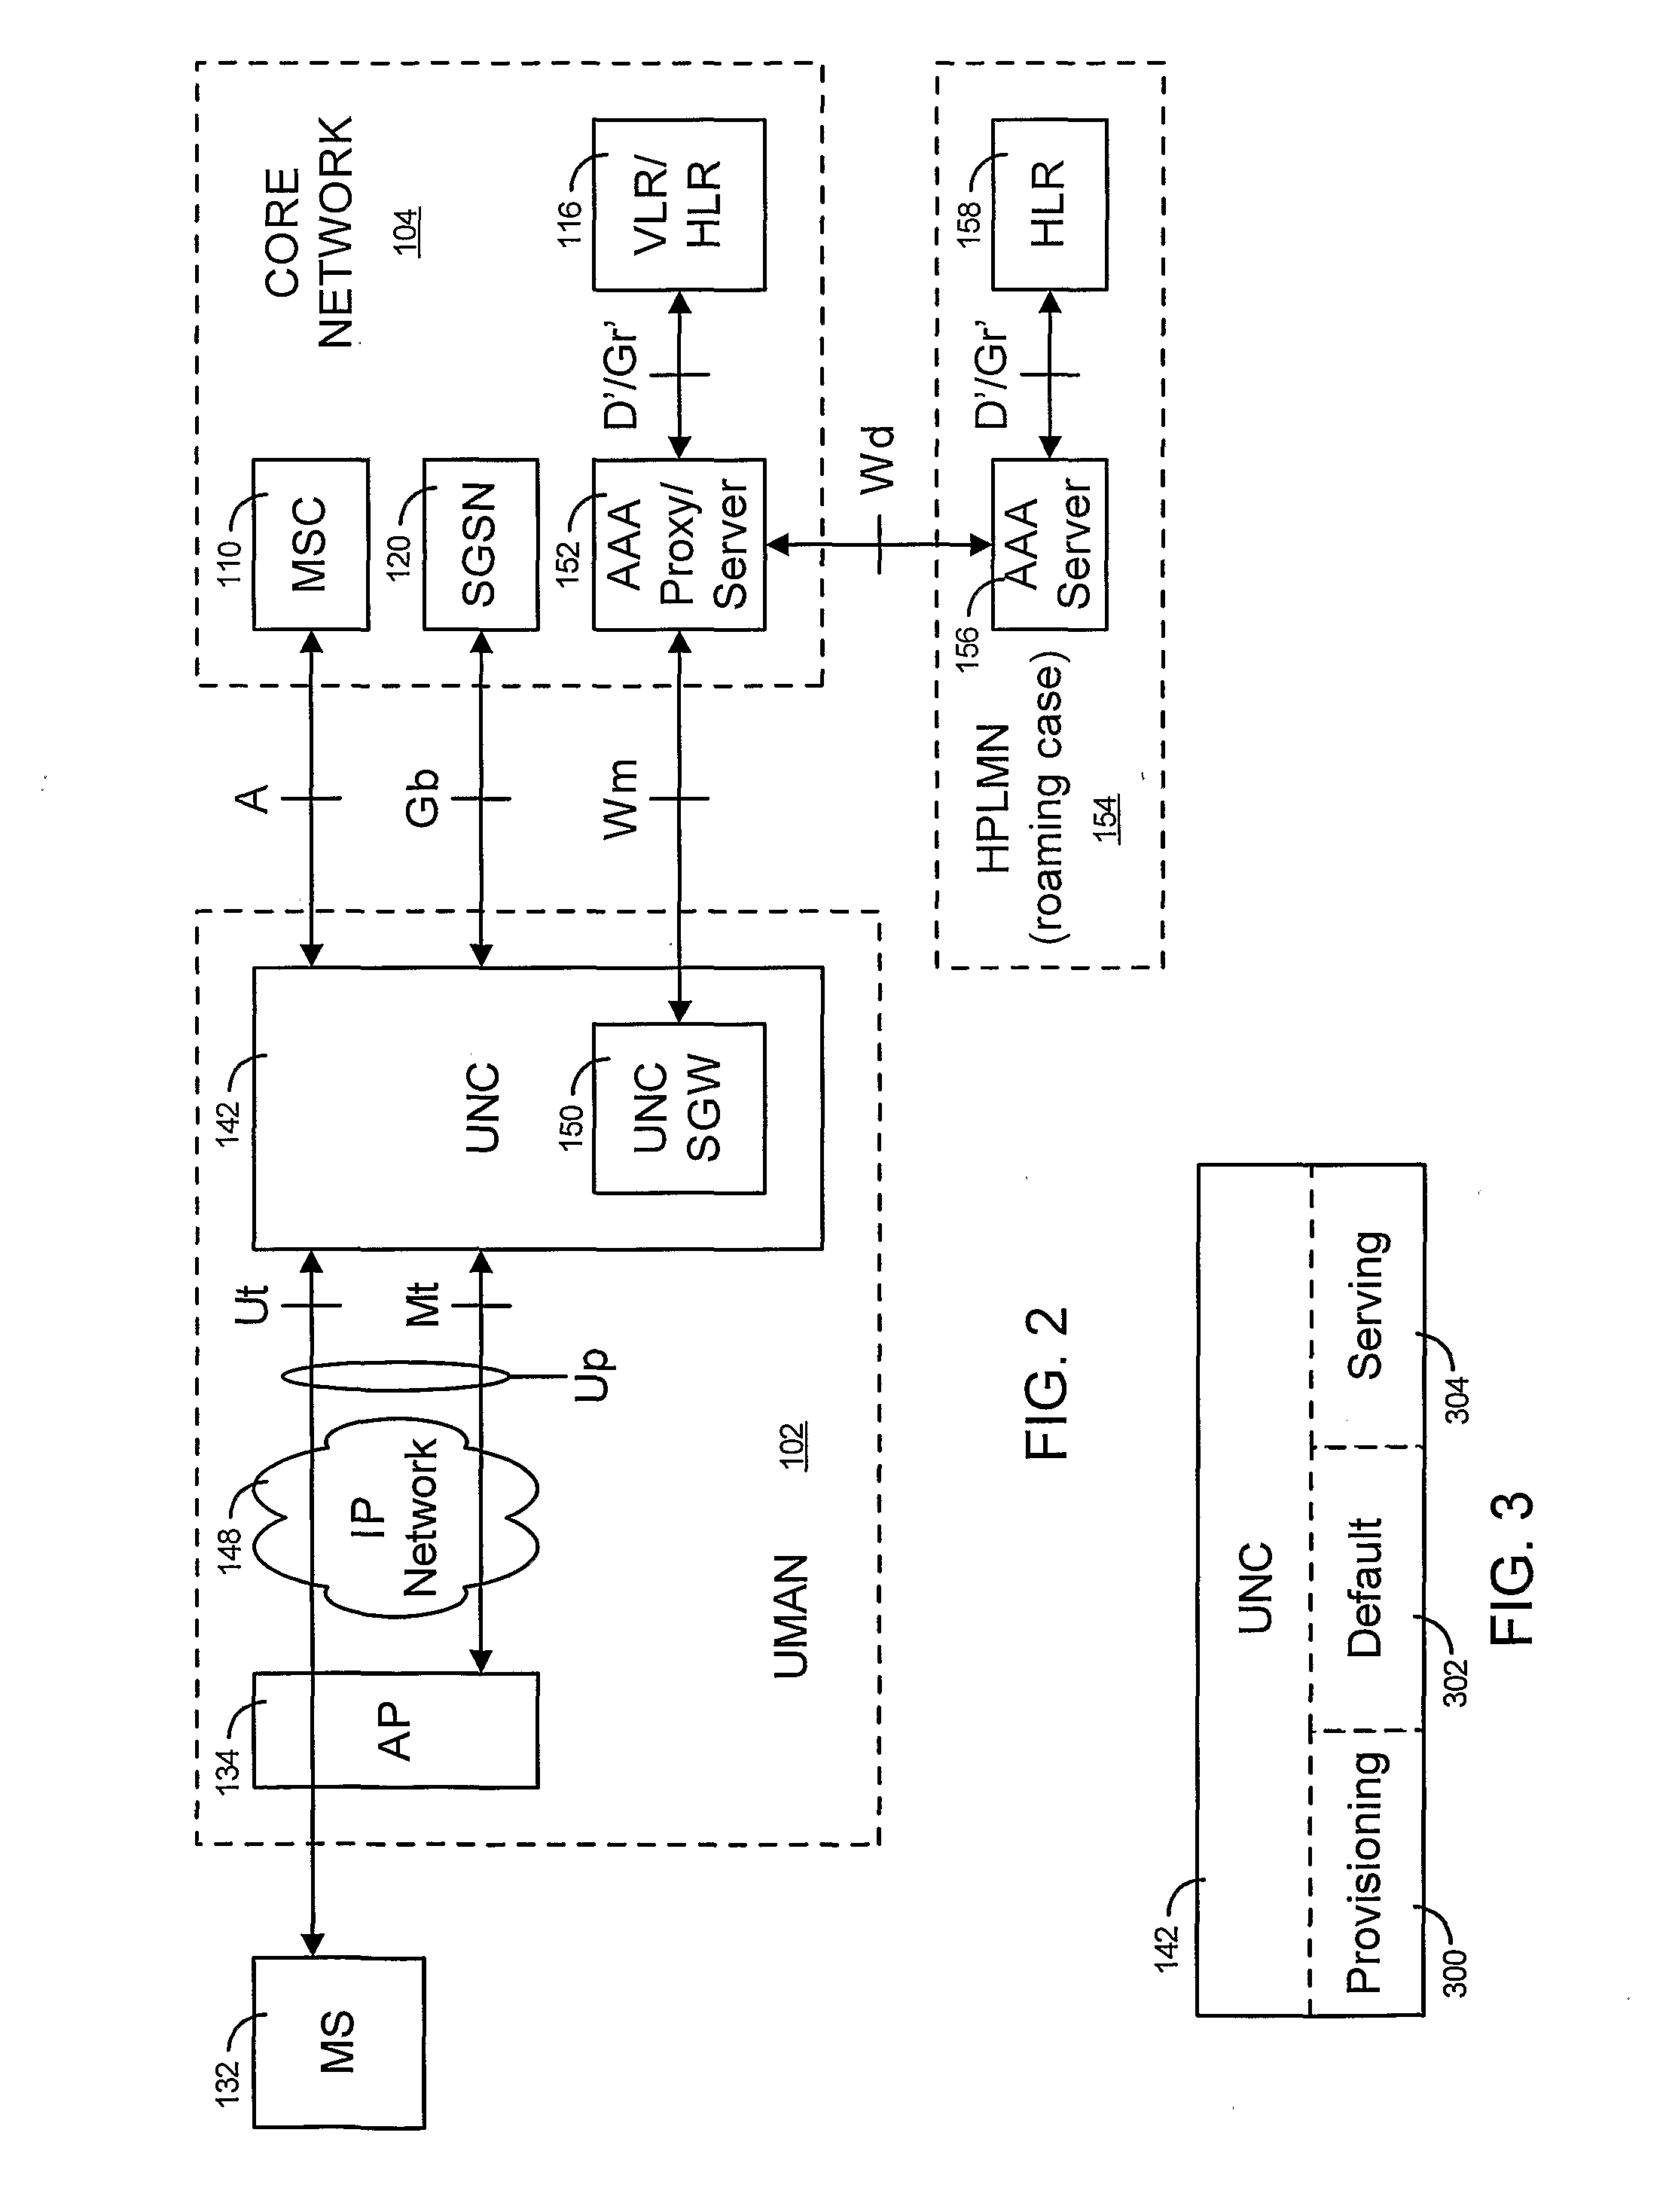 Method and system to assign mobile stations to an unlicensed mobile access network controller in an unlicensed radio access network